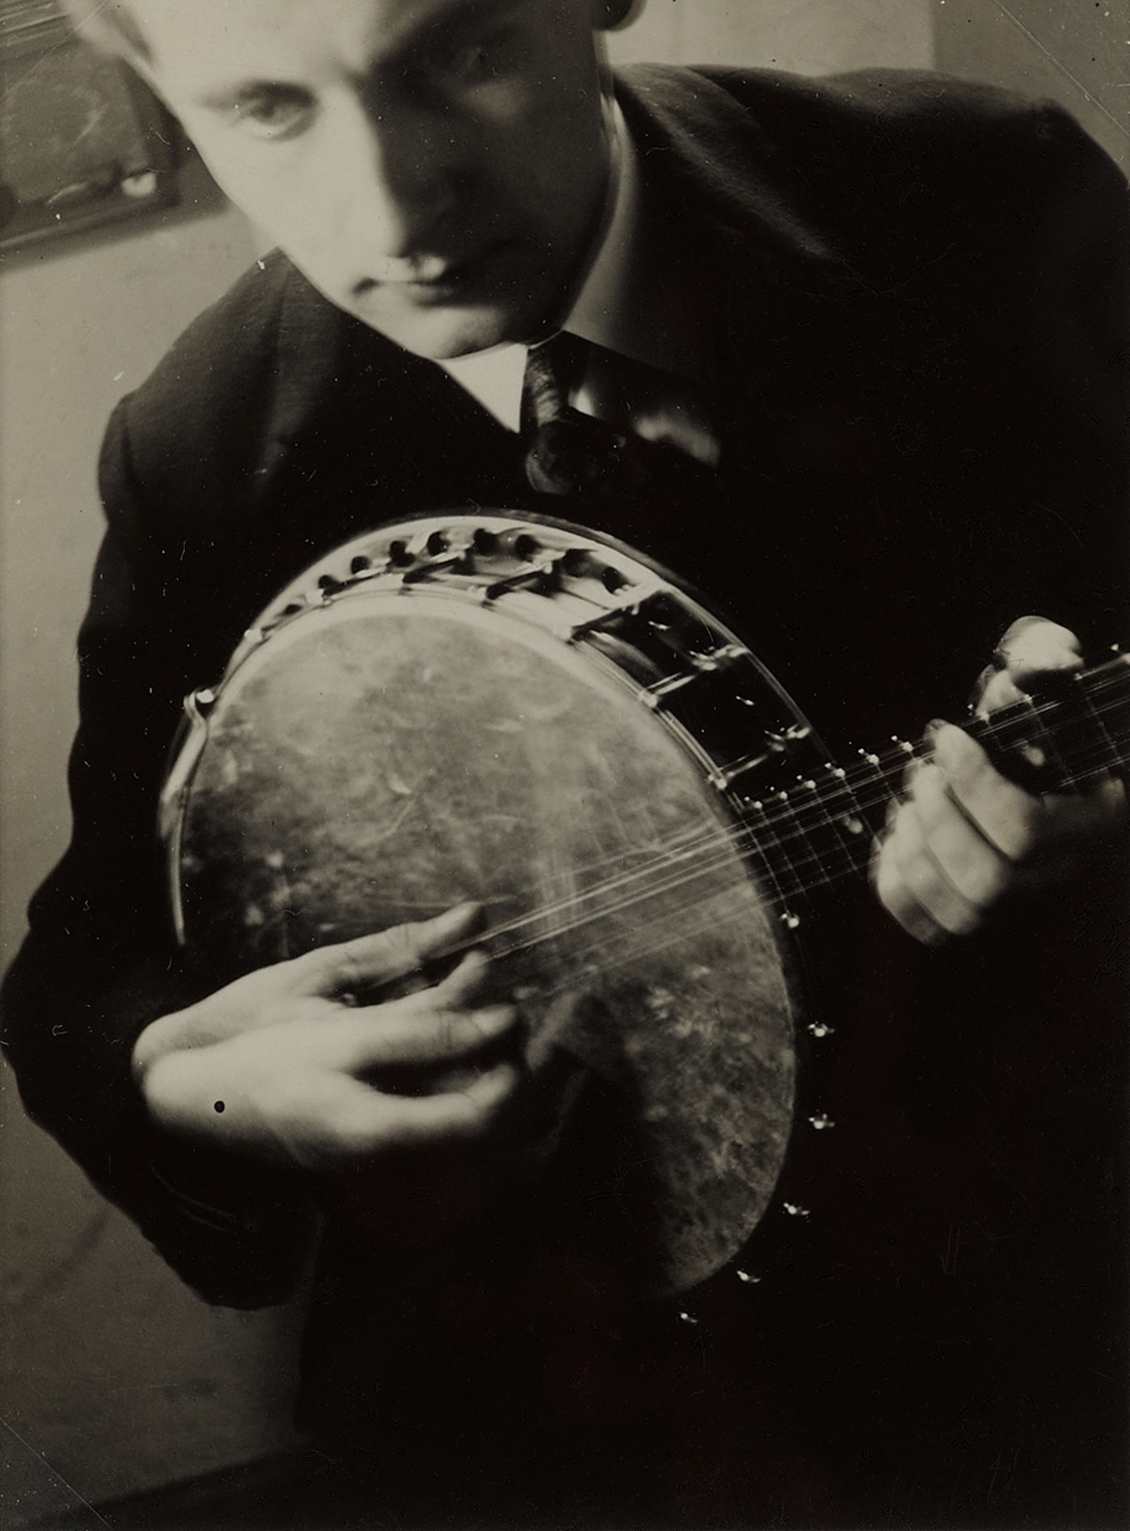 Clemens Röseler as the Banjo Player in the Bauhaus Band - T. Lux Feininger